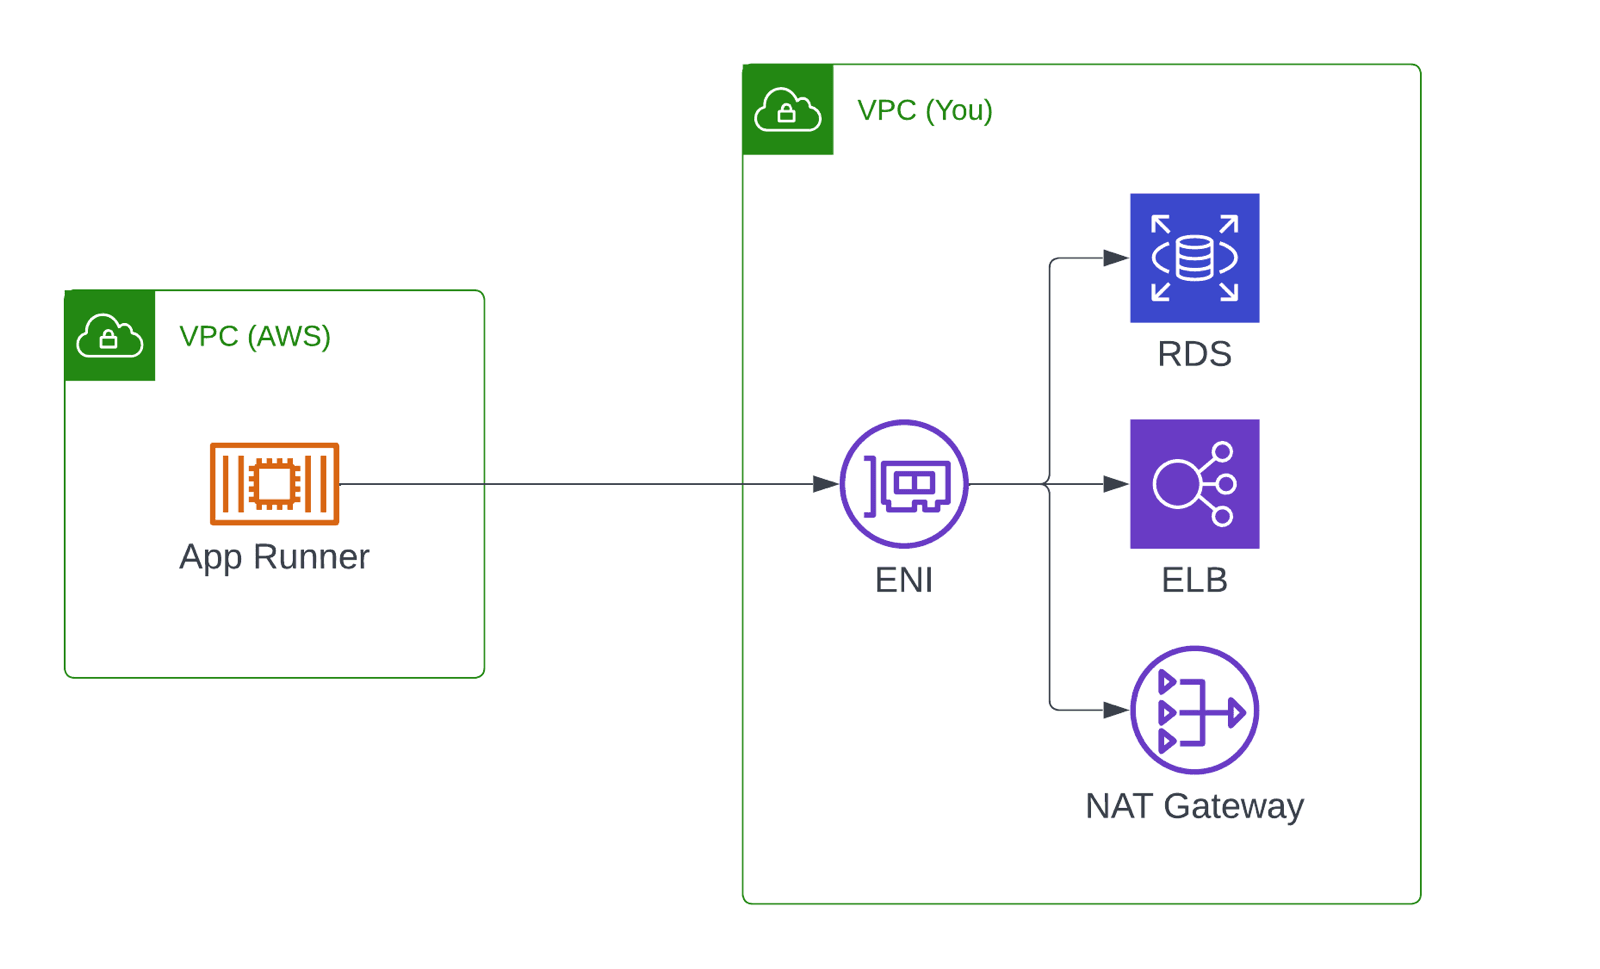 A VPC connection enables the container to access resources within a VPC